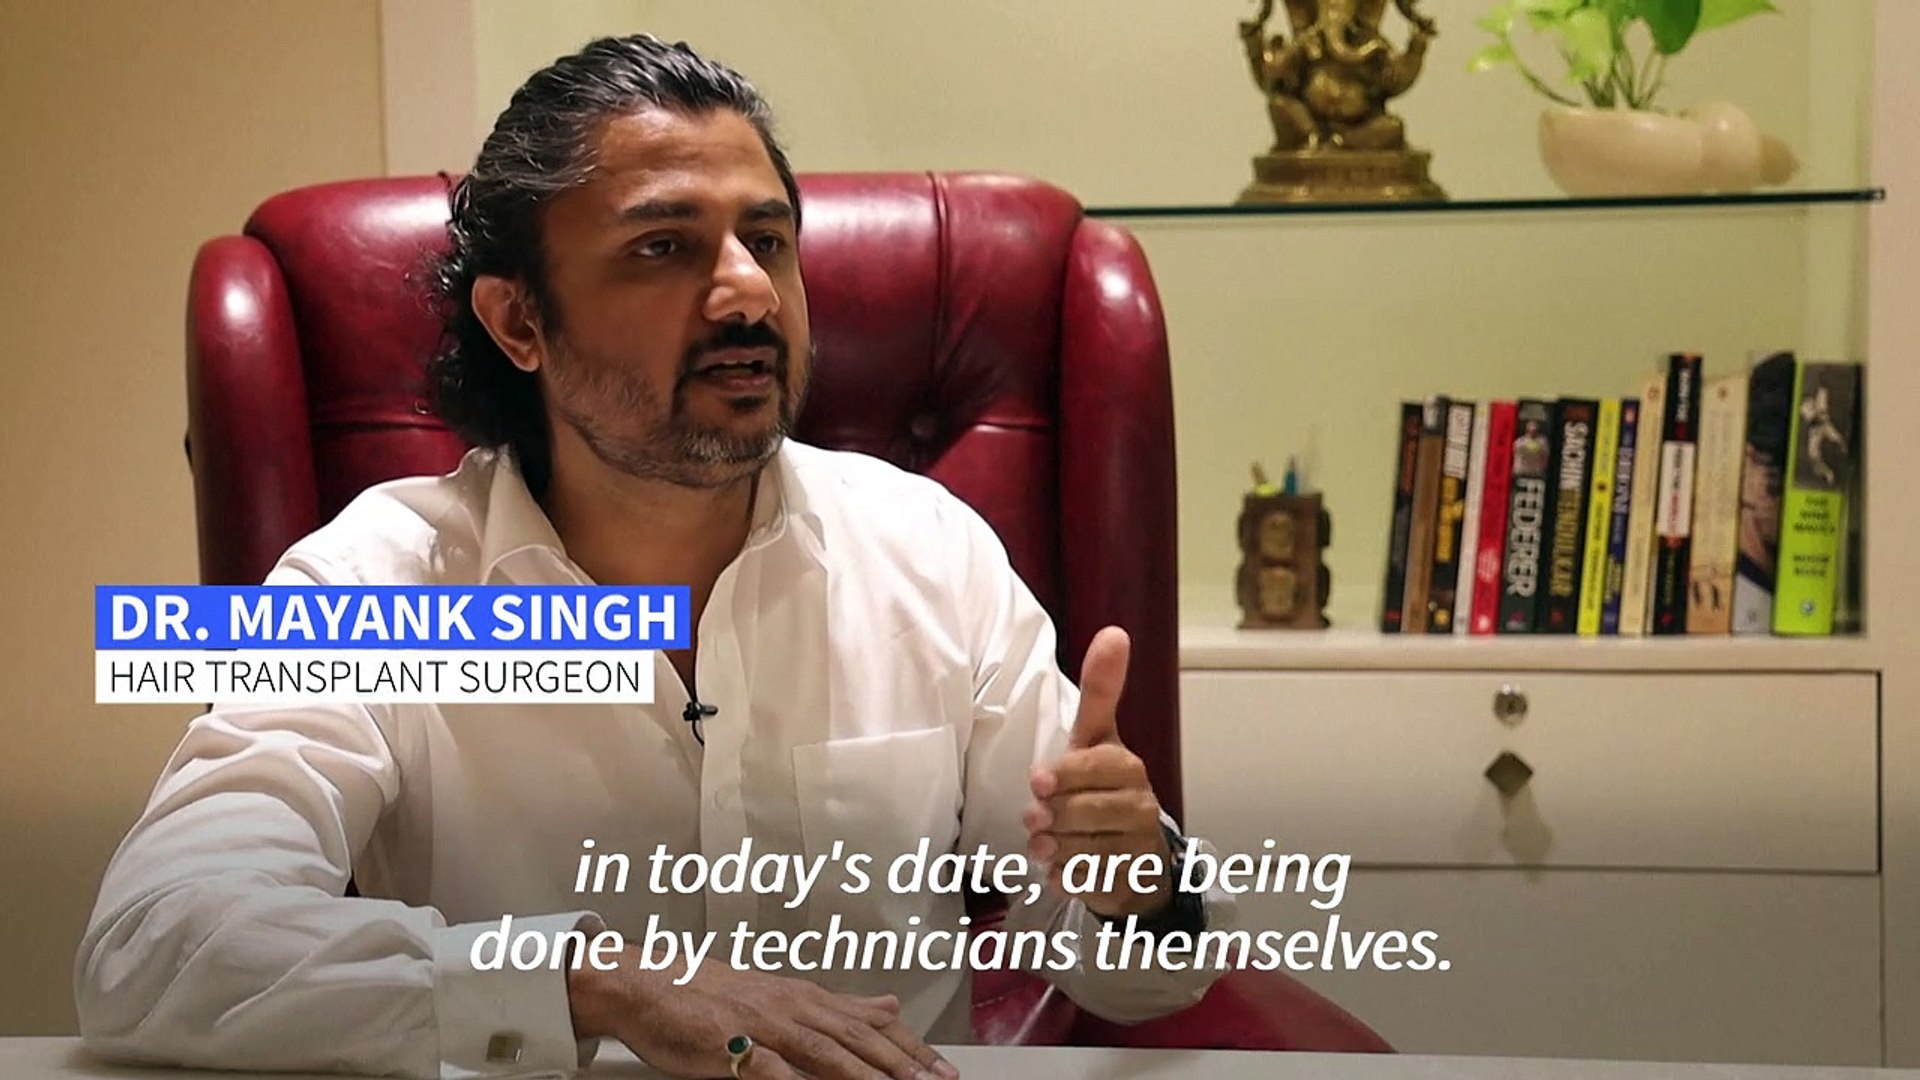 India's hair transplant fad strips away lives - video Dailymotion